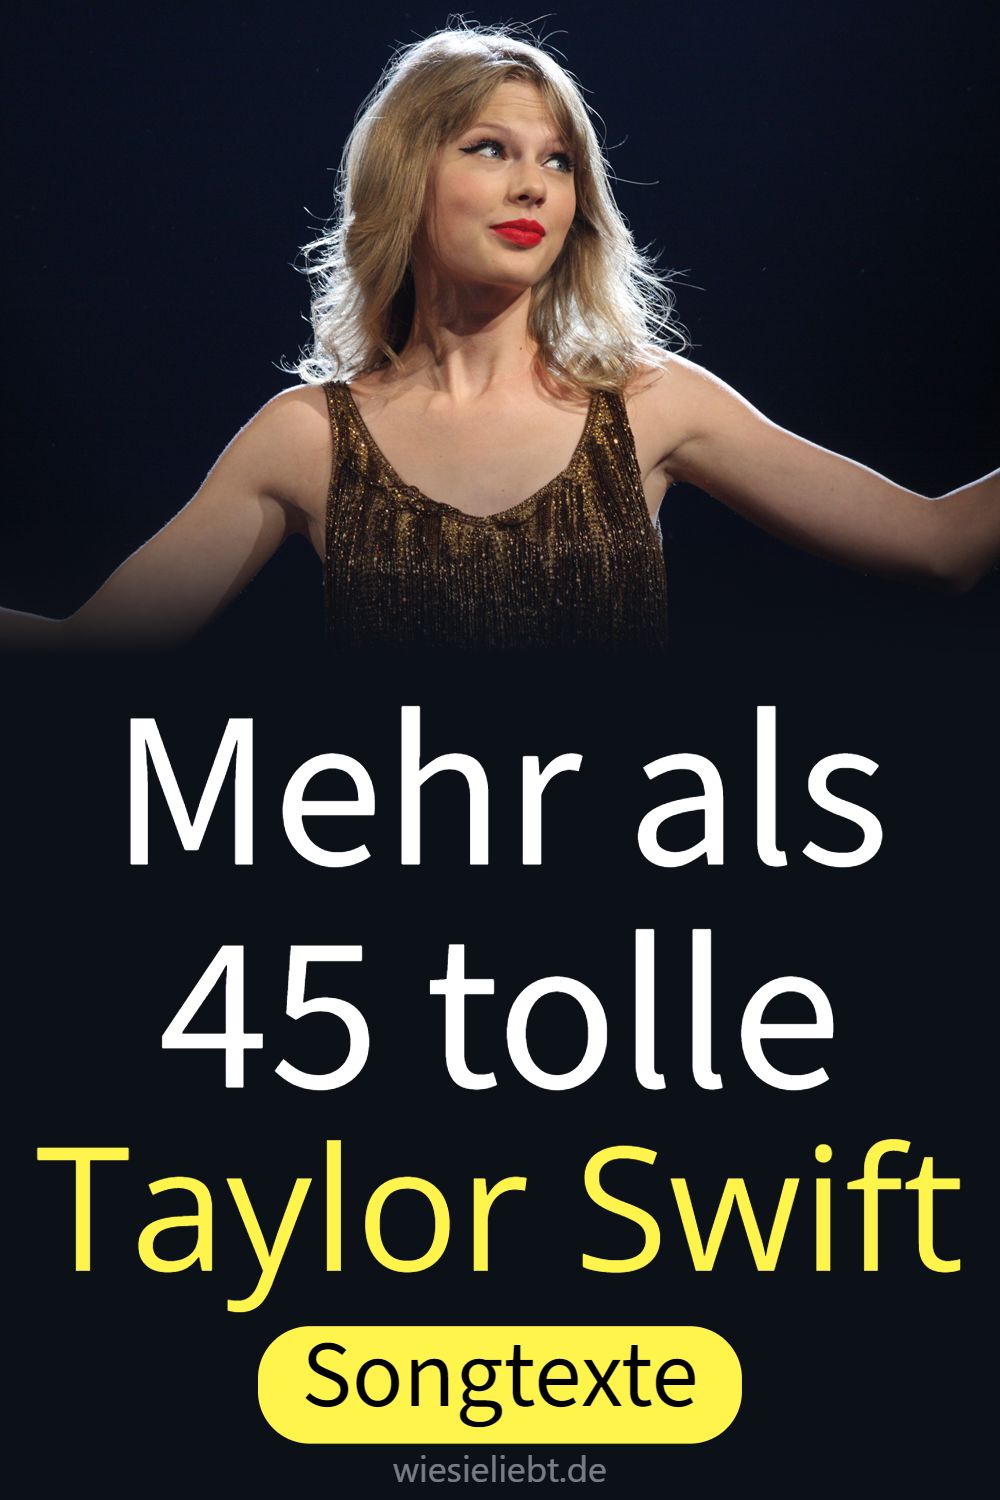 Mehr als 45 tolle Taylor Swift Songtexte